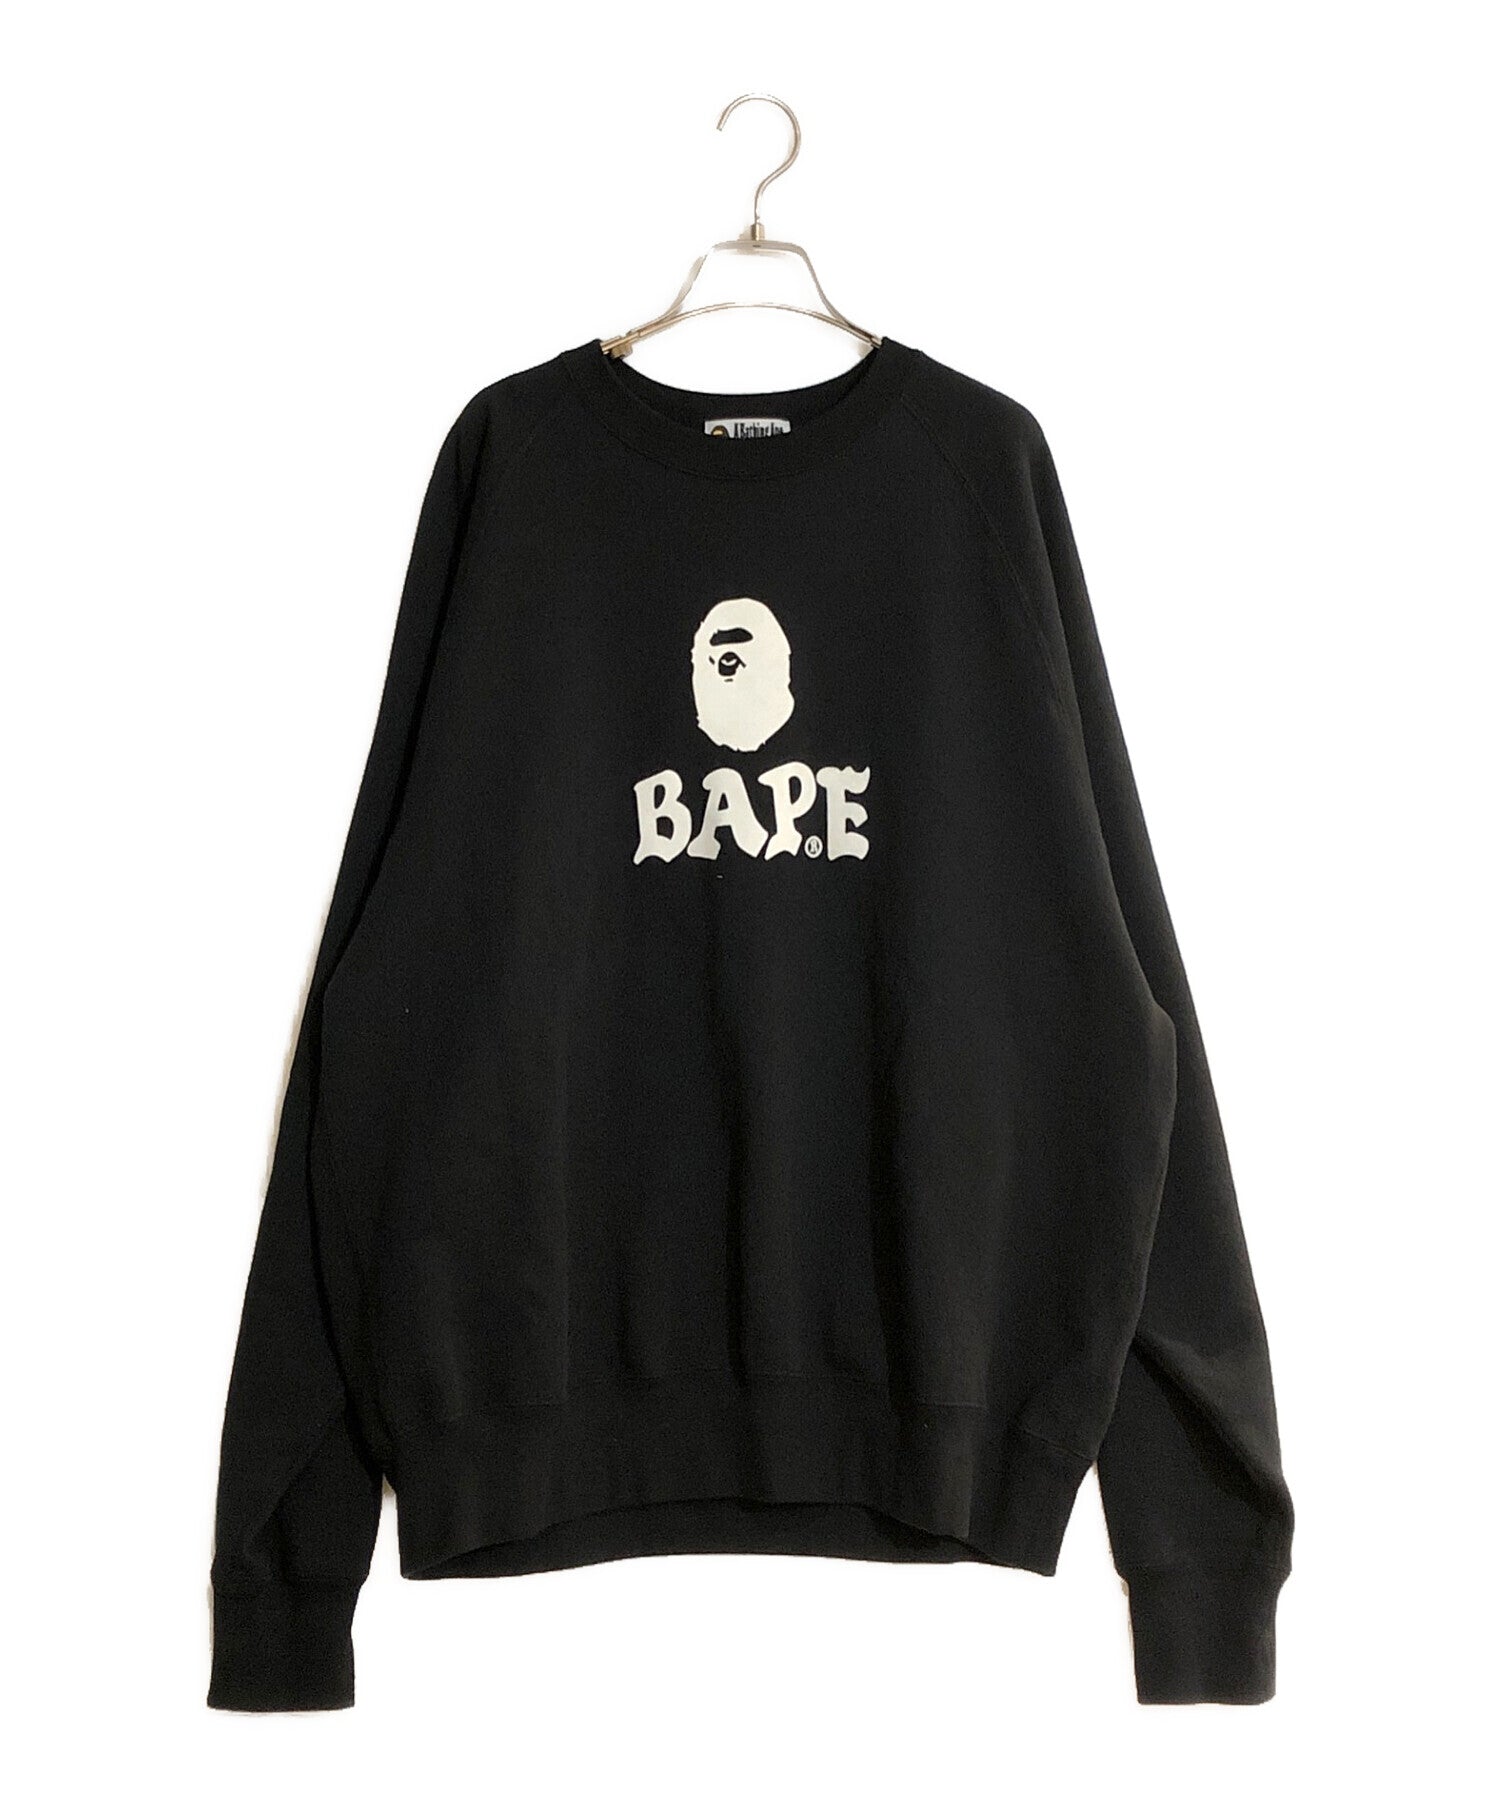 A BATHING APE BAPE Relaxed Fit Crew Neck 0ZXSWM113001J